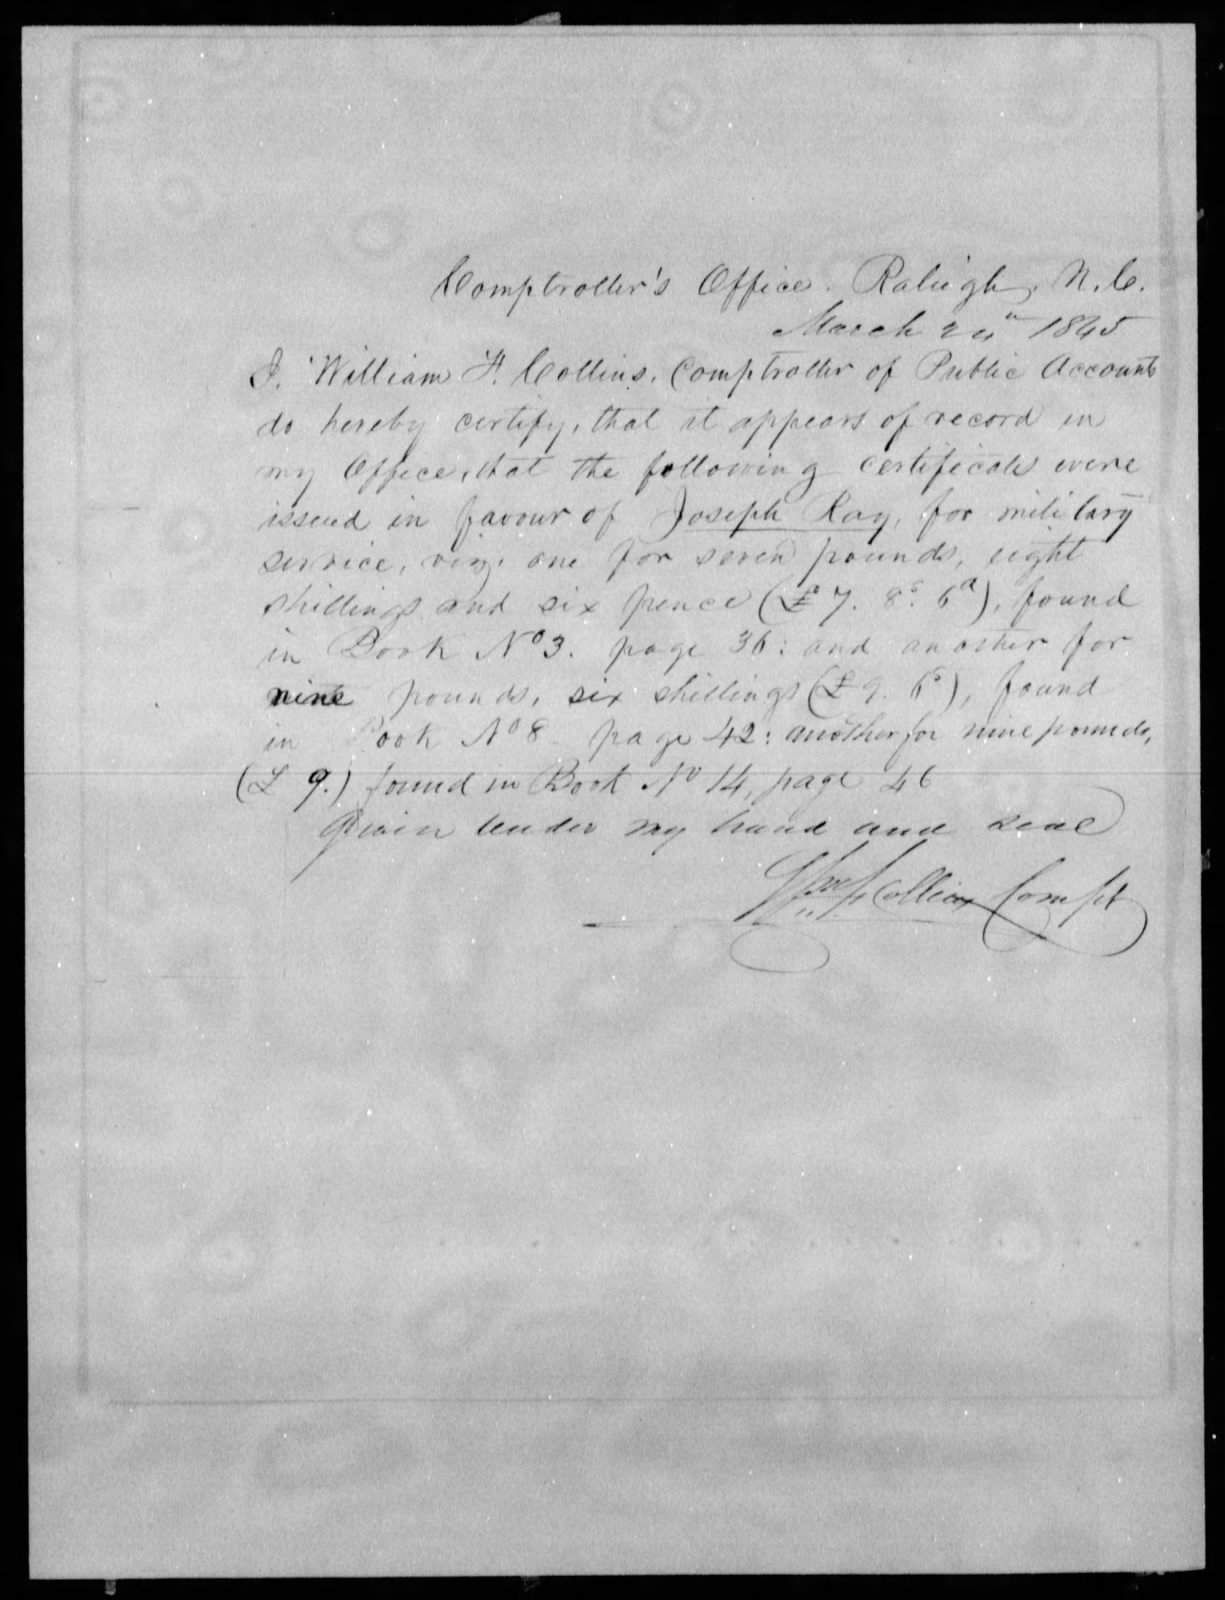 Proof of Service for Joseph Ray, 24 March 1845